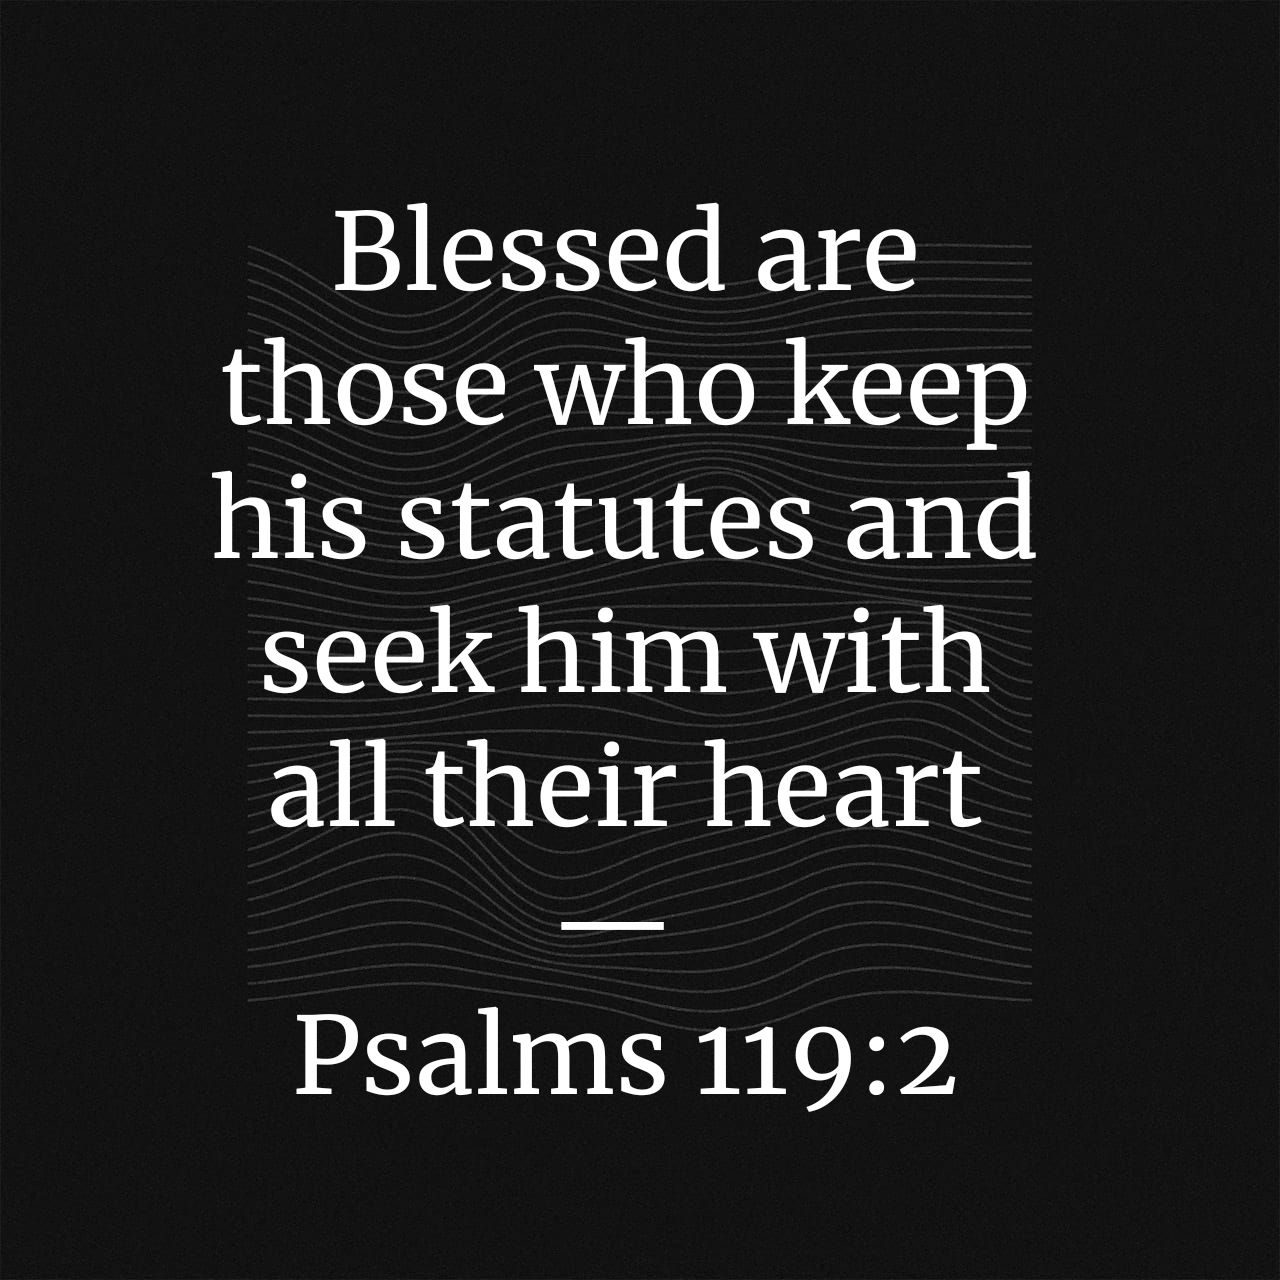 Blessed are those who his statutes and seek him with all their heart Psalms 119.2 keep